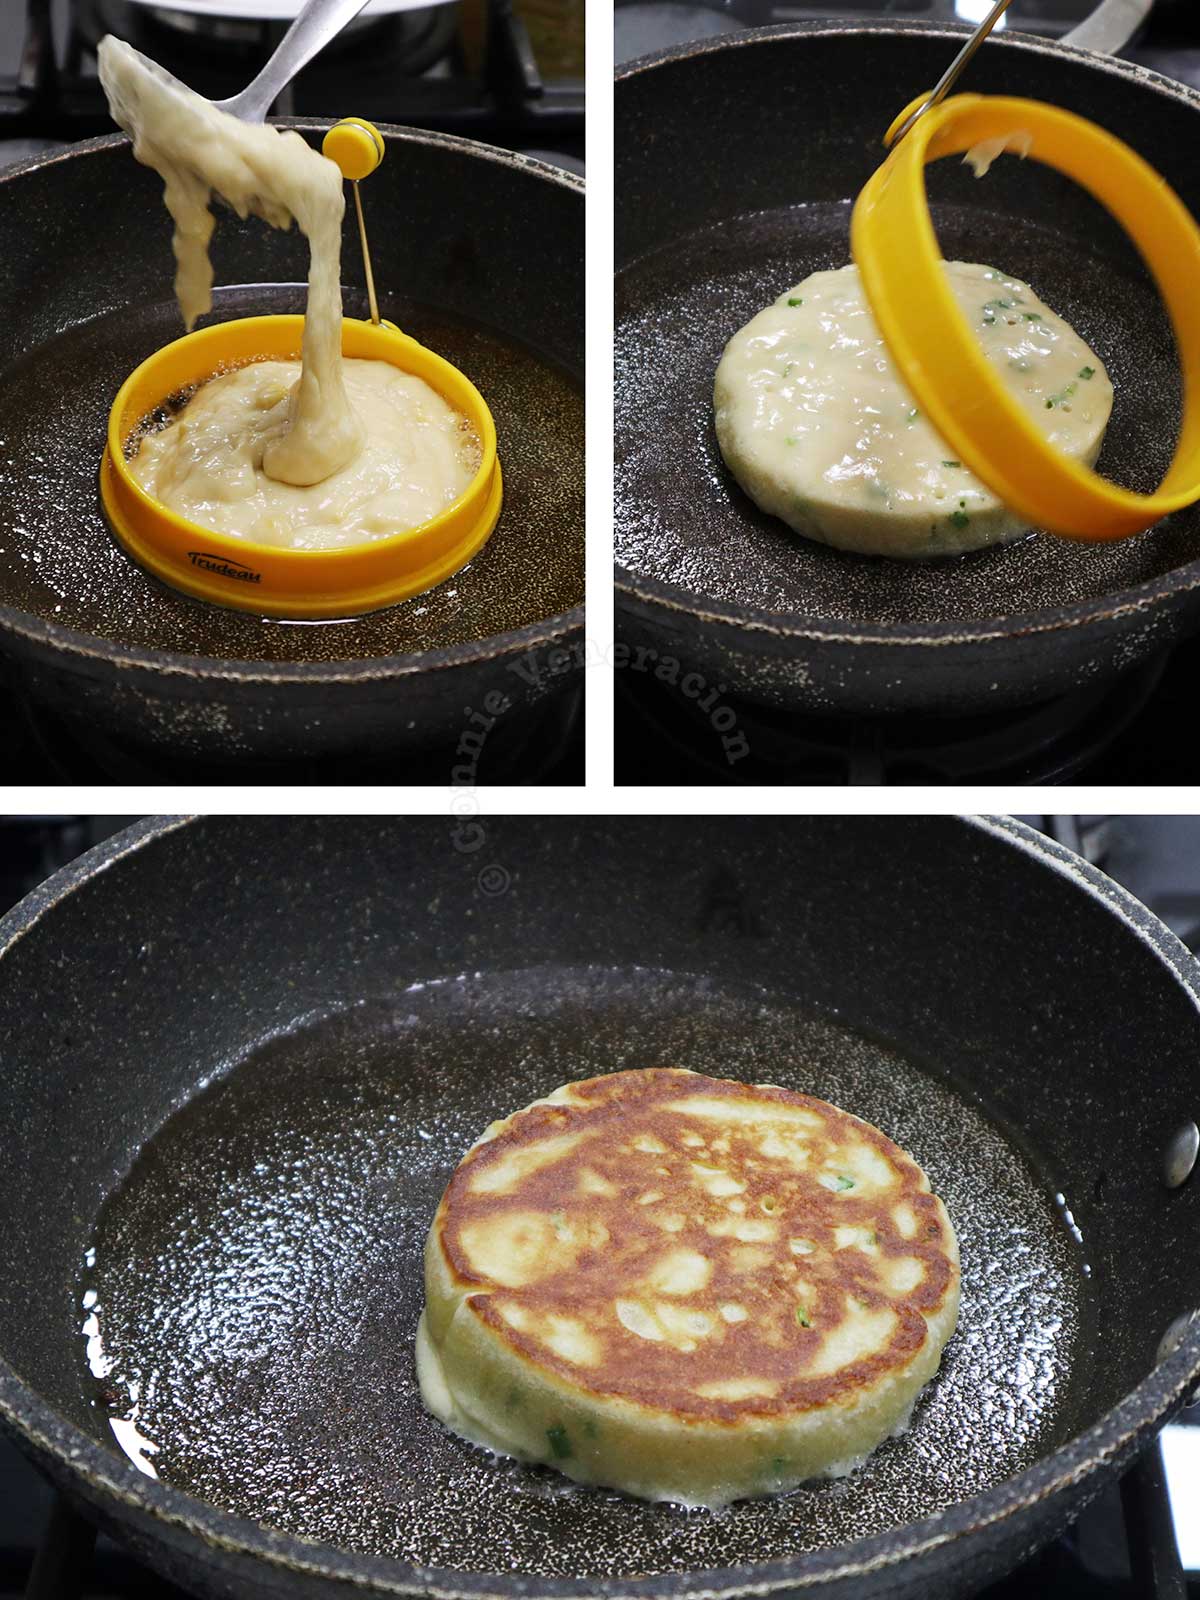 Cooking pancake with silicone mold